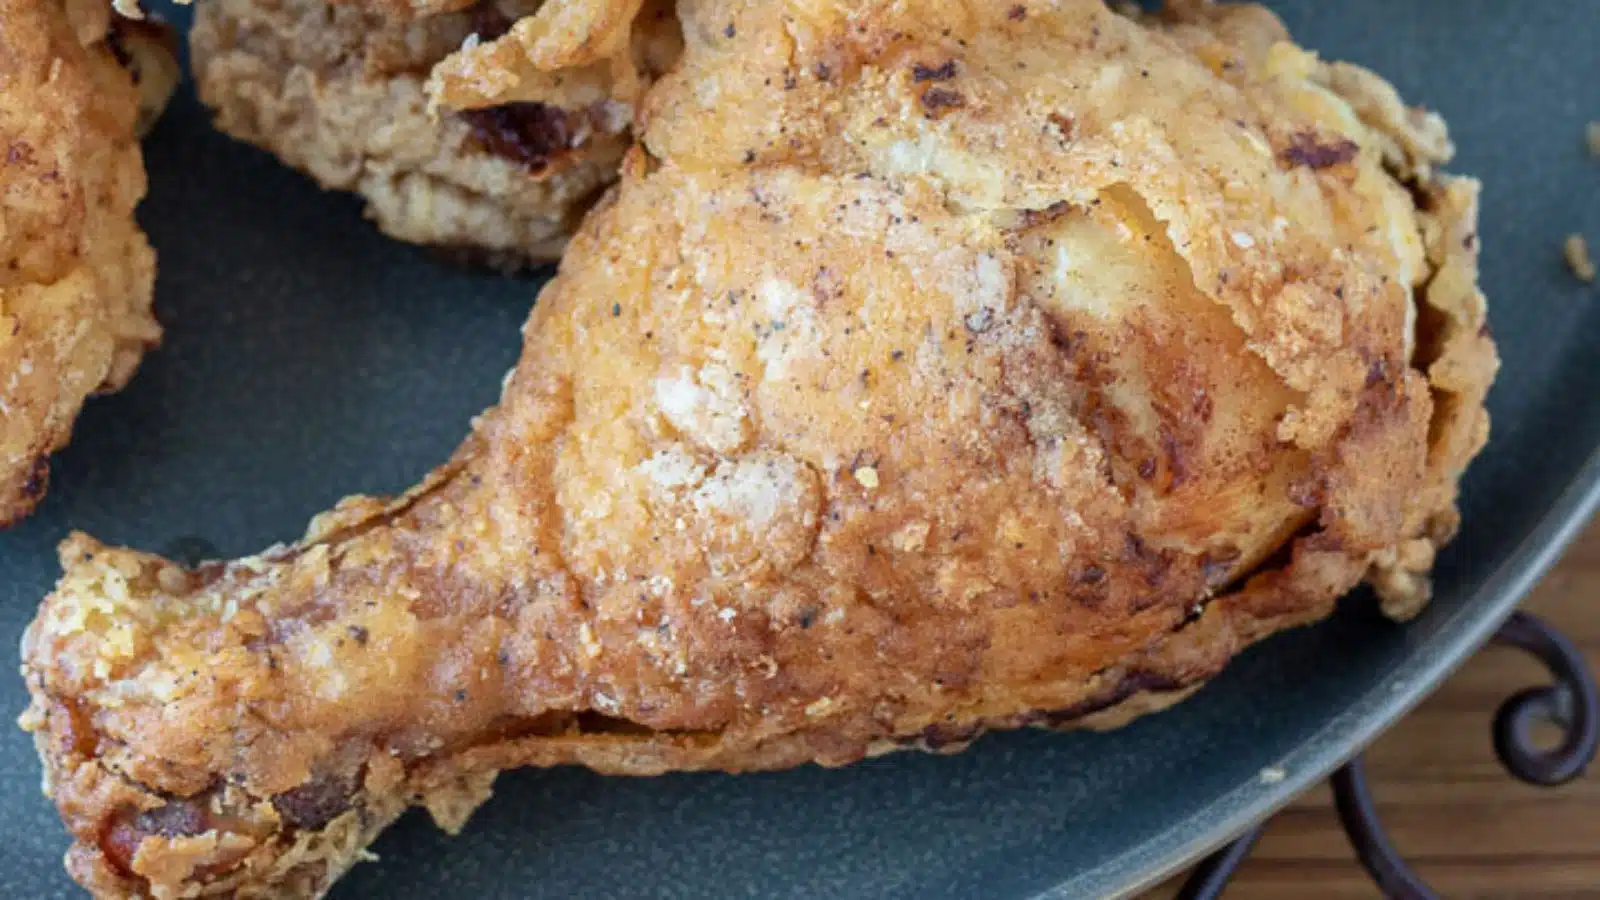 Close up of a plate with fried chicken on it